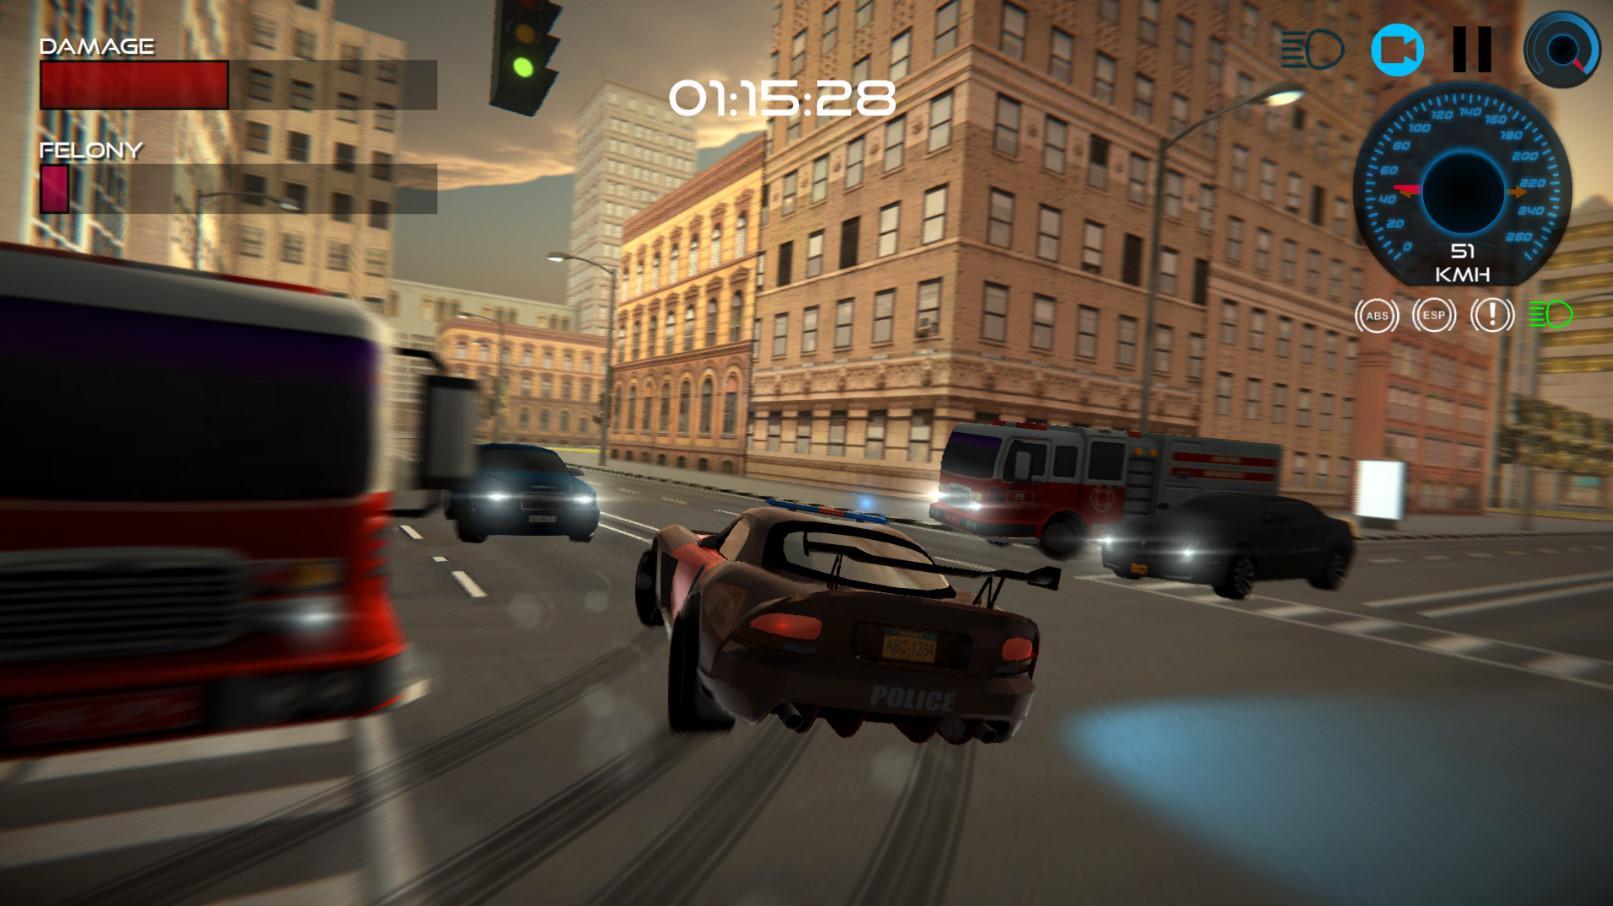 City Car Driving Simulator 4 for Android - APK Download